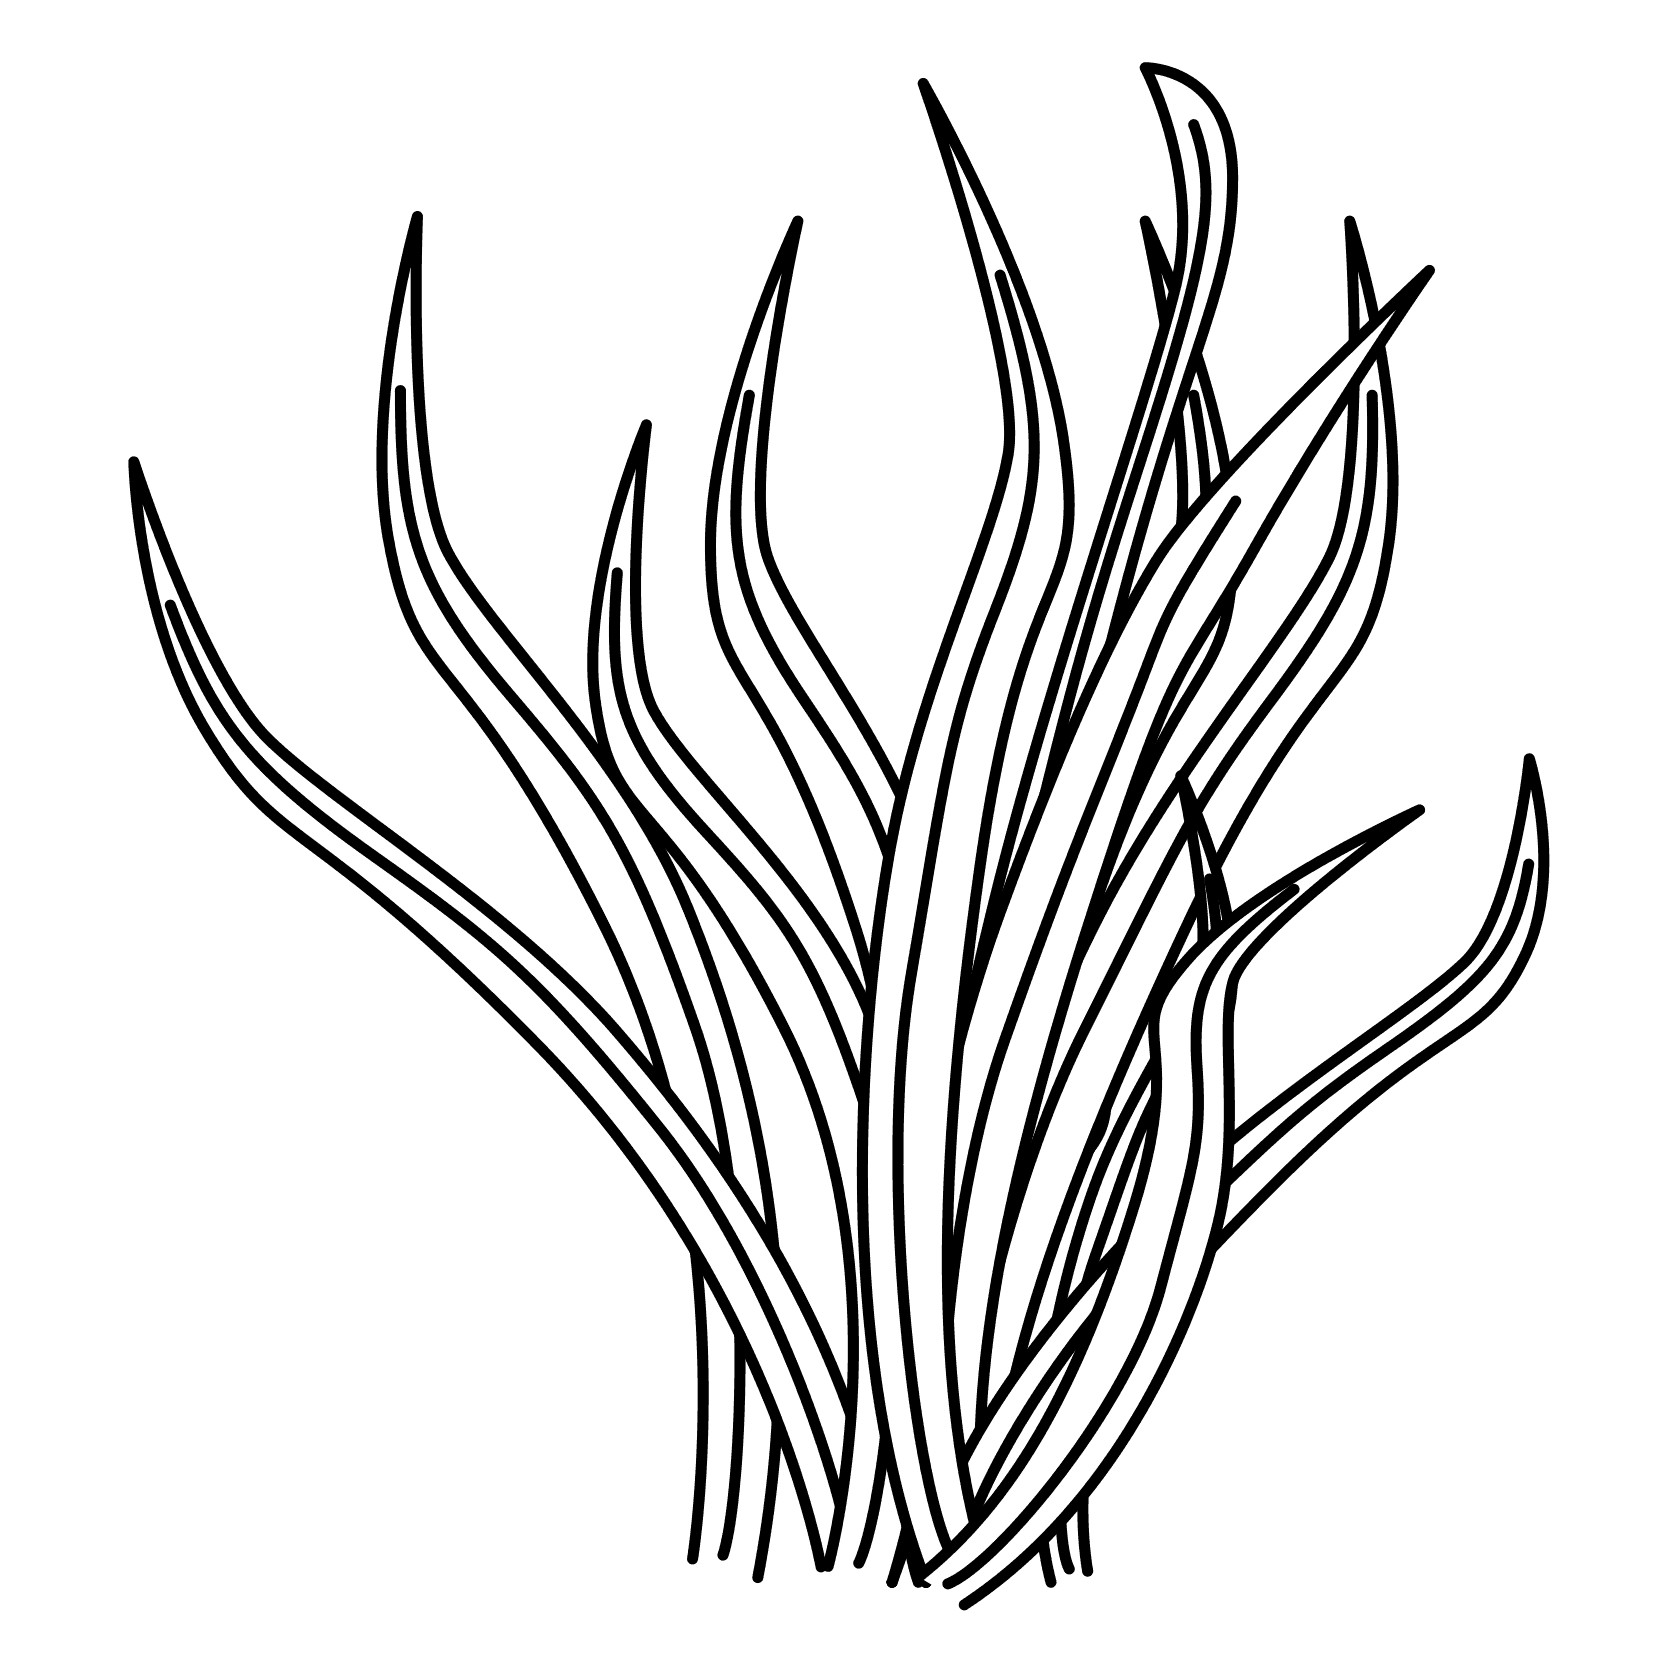 Seaweed Coloring Pages
 Sea Grass clipart ocean plant Pencil and in color sea